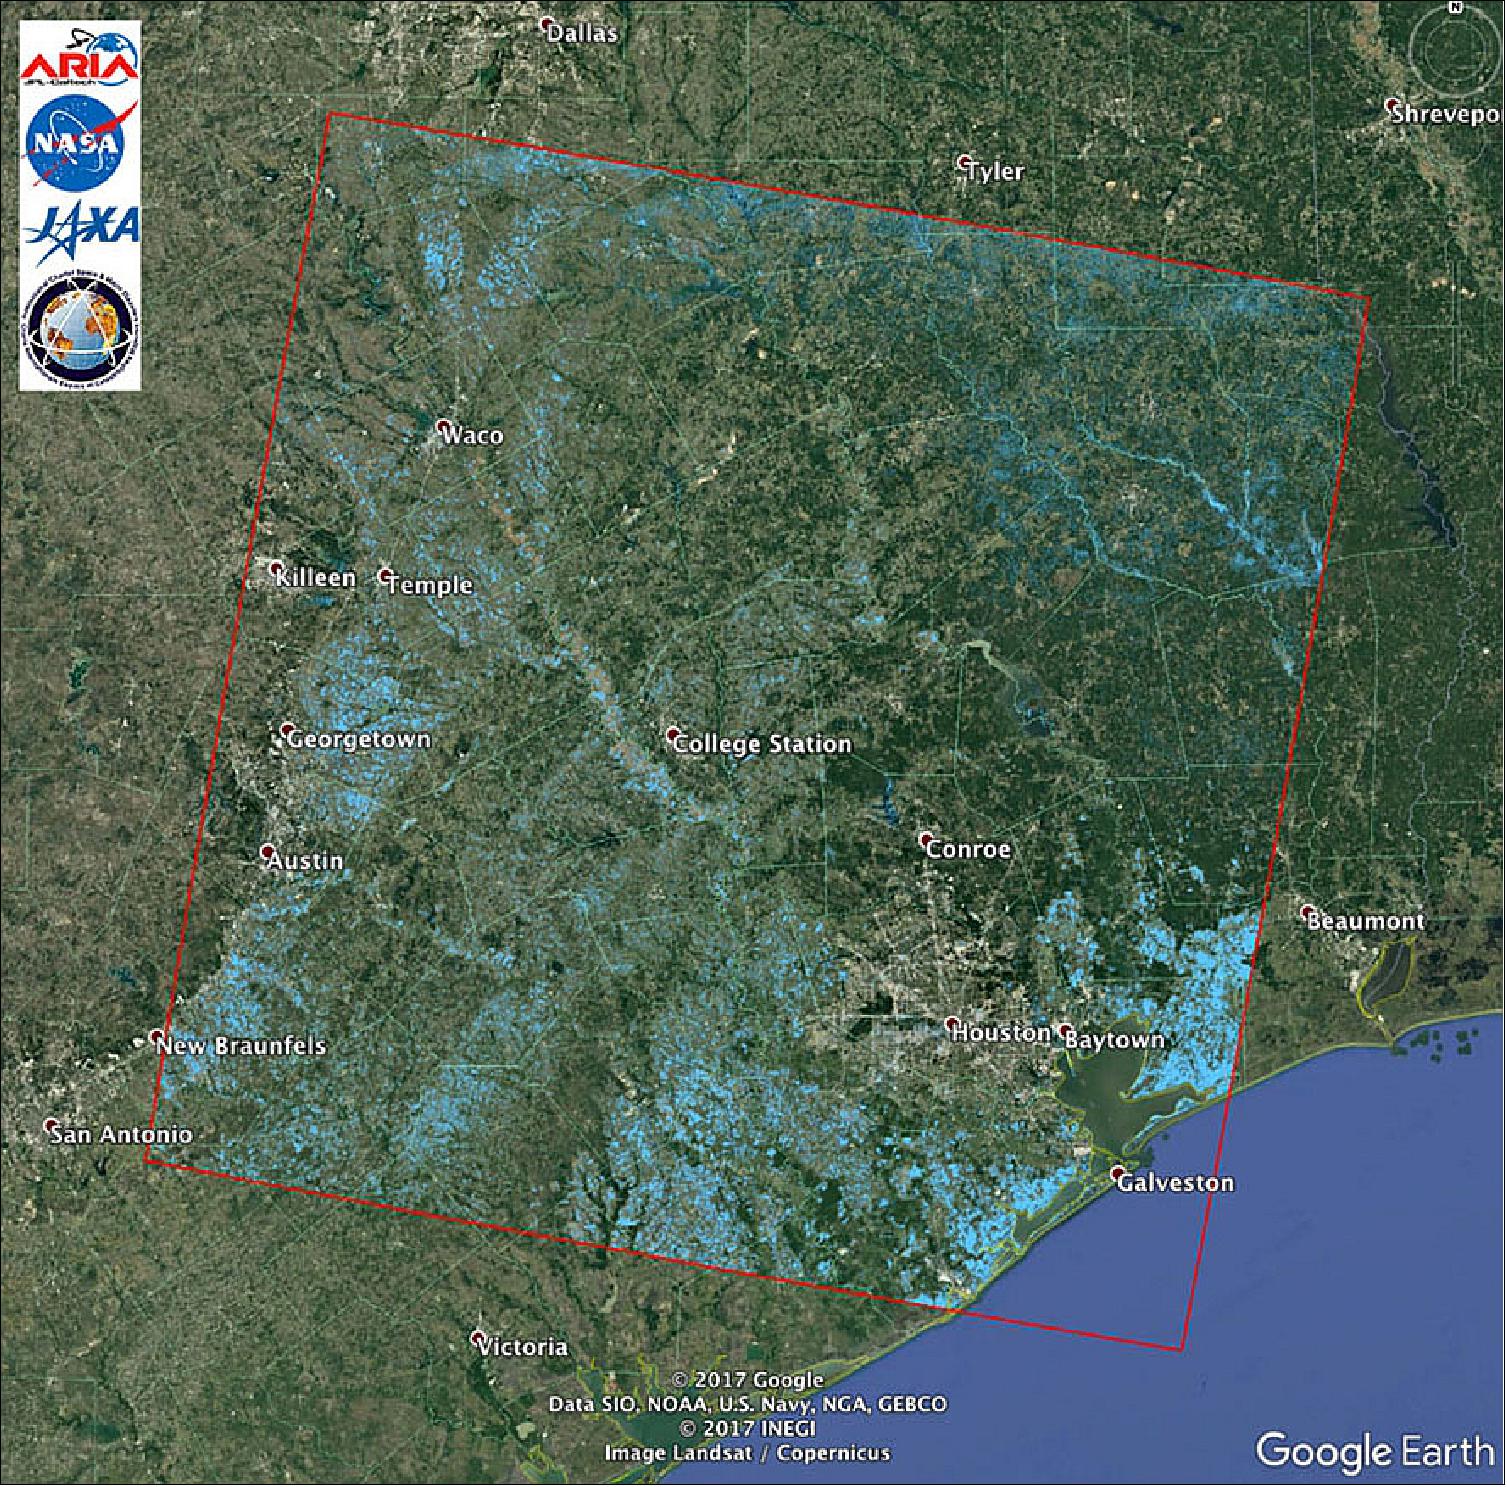 Figure 35: JPL ARIA team created this Flood Proxy Map showing areas of Southeast Texas likely flooded from Hurricane Harvey (light blue). The map is derived from radar images from the JAXA (Japan Aerospace Exploration Agency) ALOS-2 PALSAR-2 satellite before and after landfall (image credit: NASA/JPL-Caltech/JAXA/METI/Google Earth)